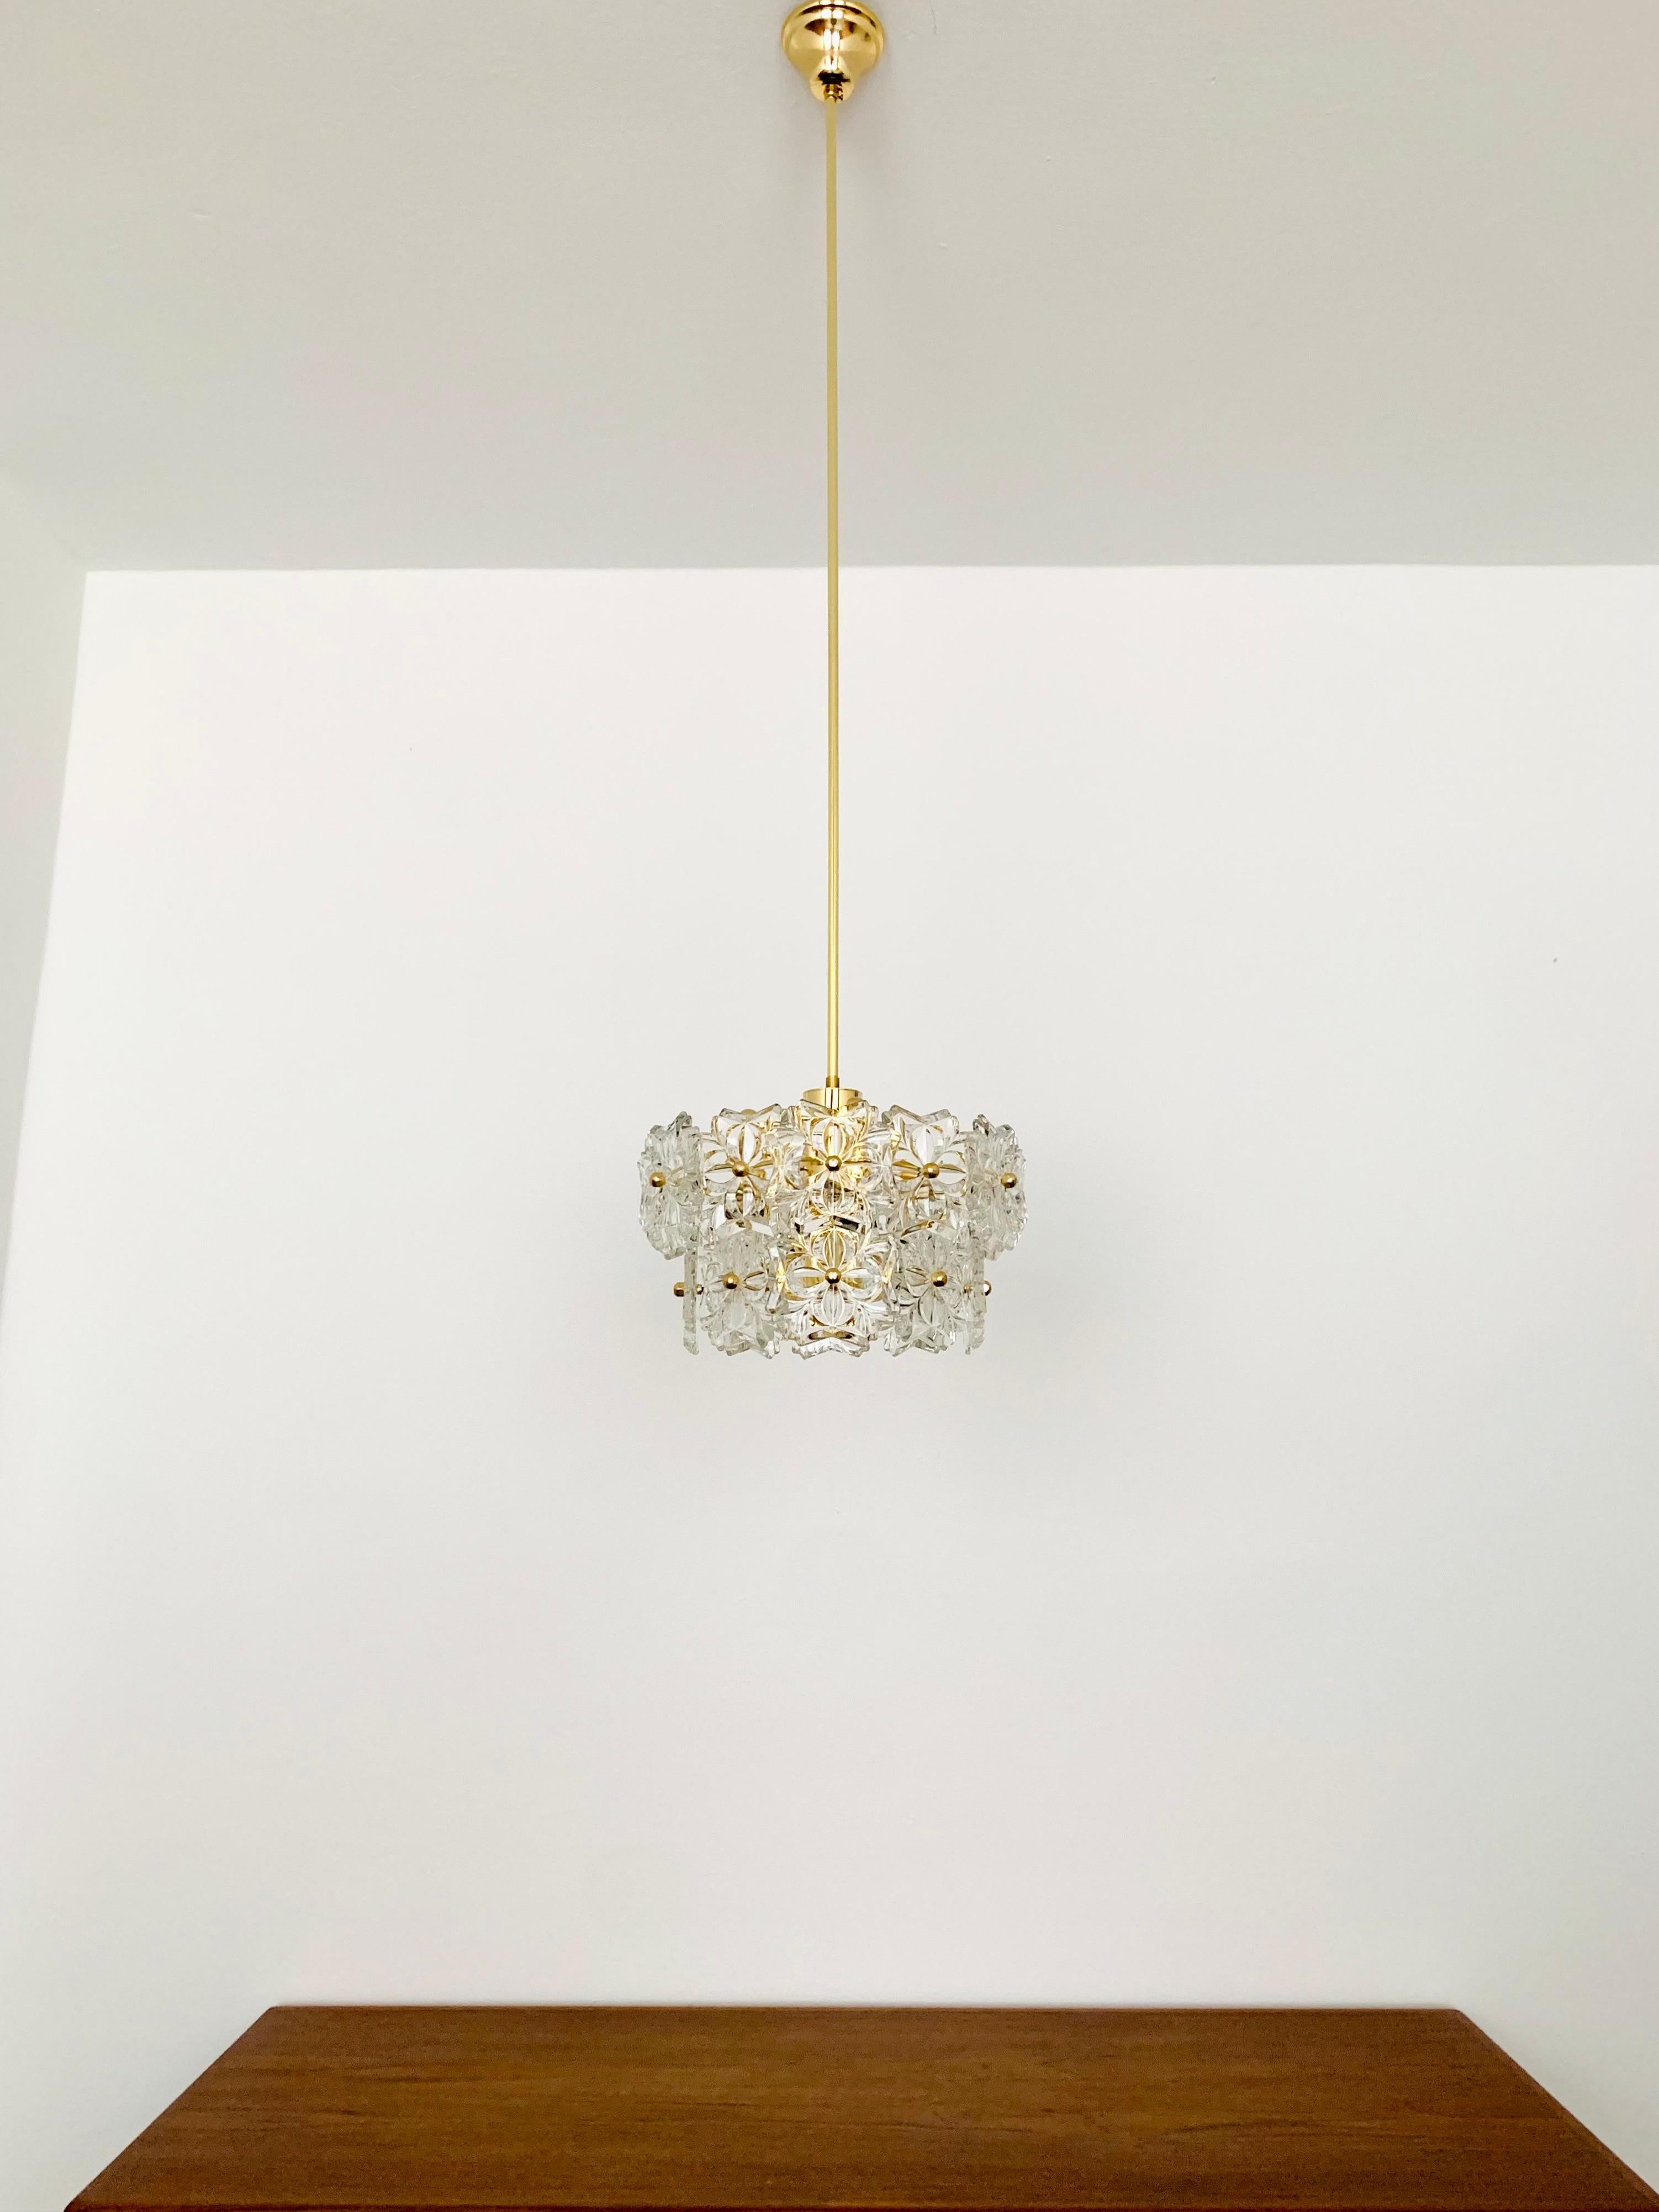 Mid-20th Century Floral Crystal Glass Chandelier by Sölken For Sale